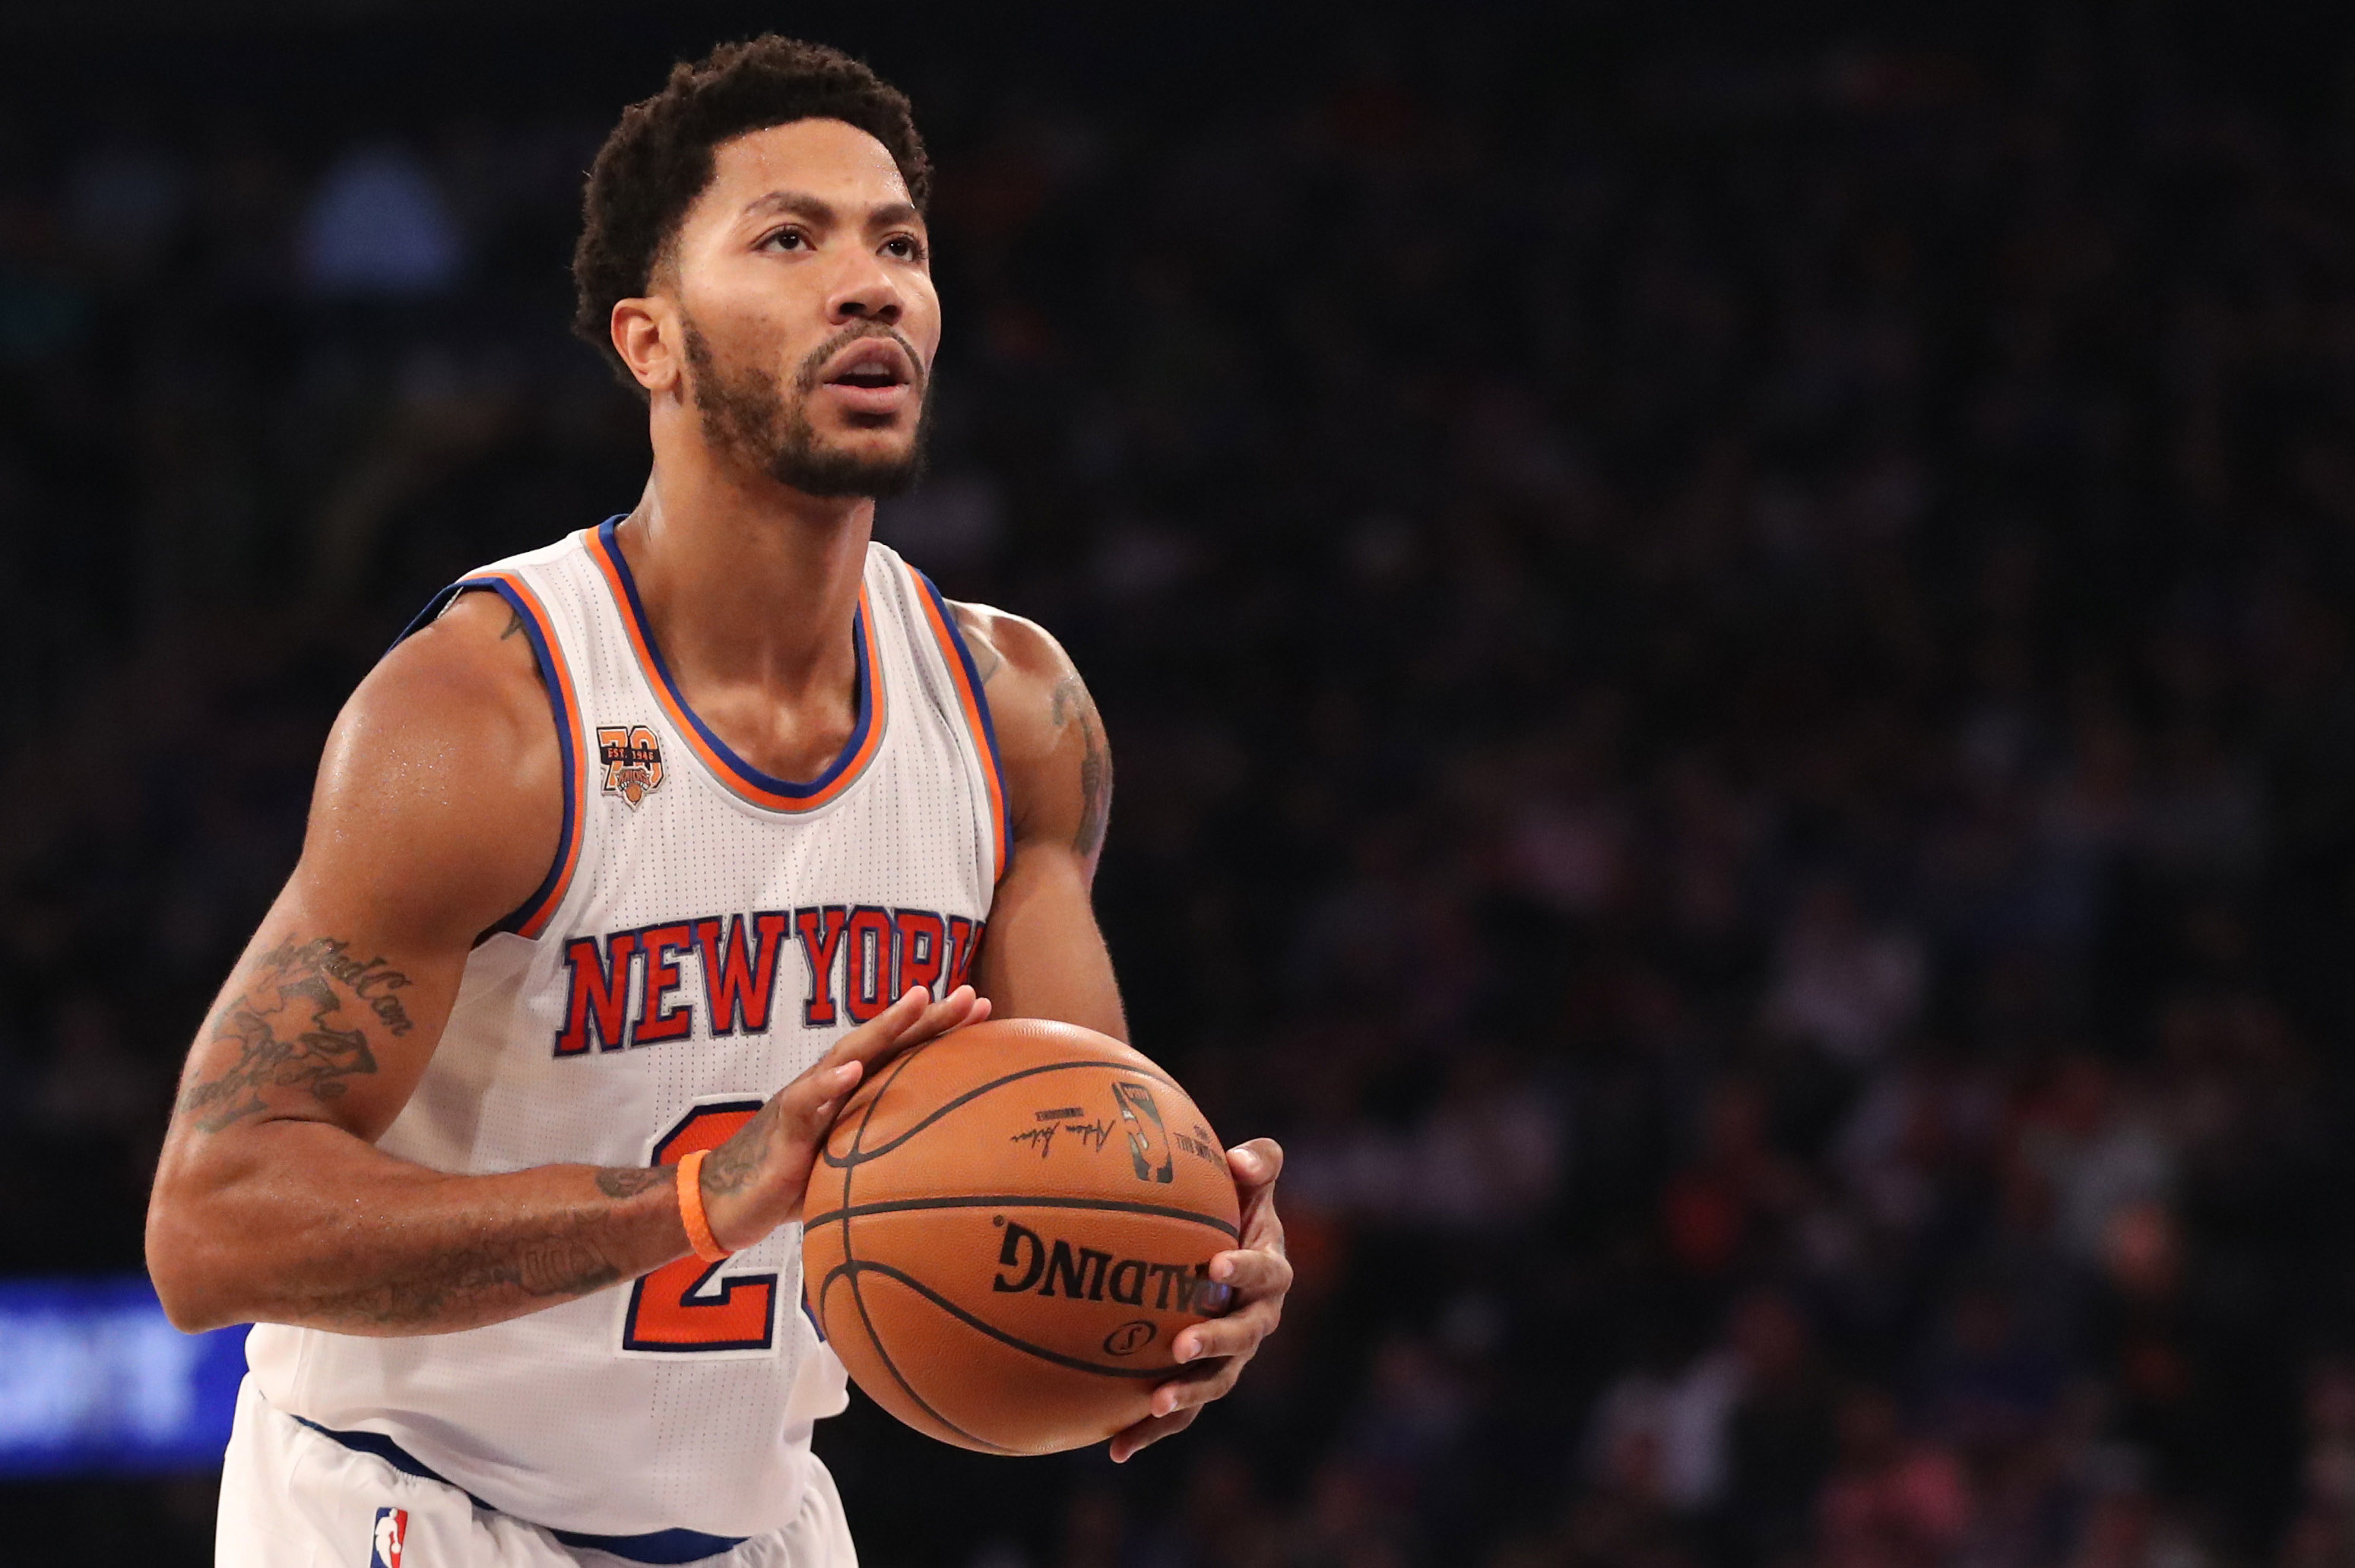 San Antonio Spurs: Pros and cons of signing Derrick Rose